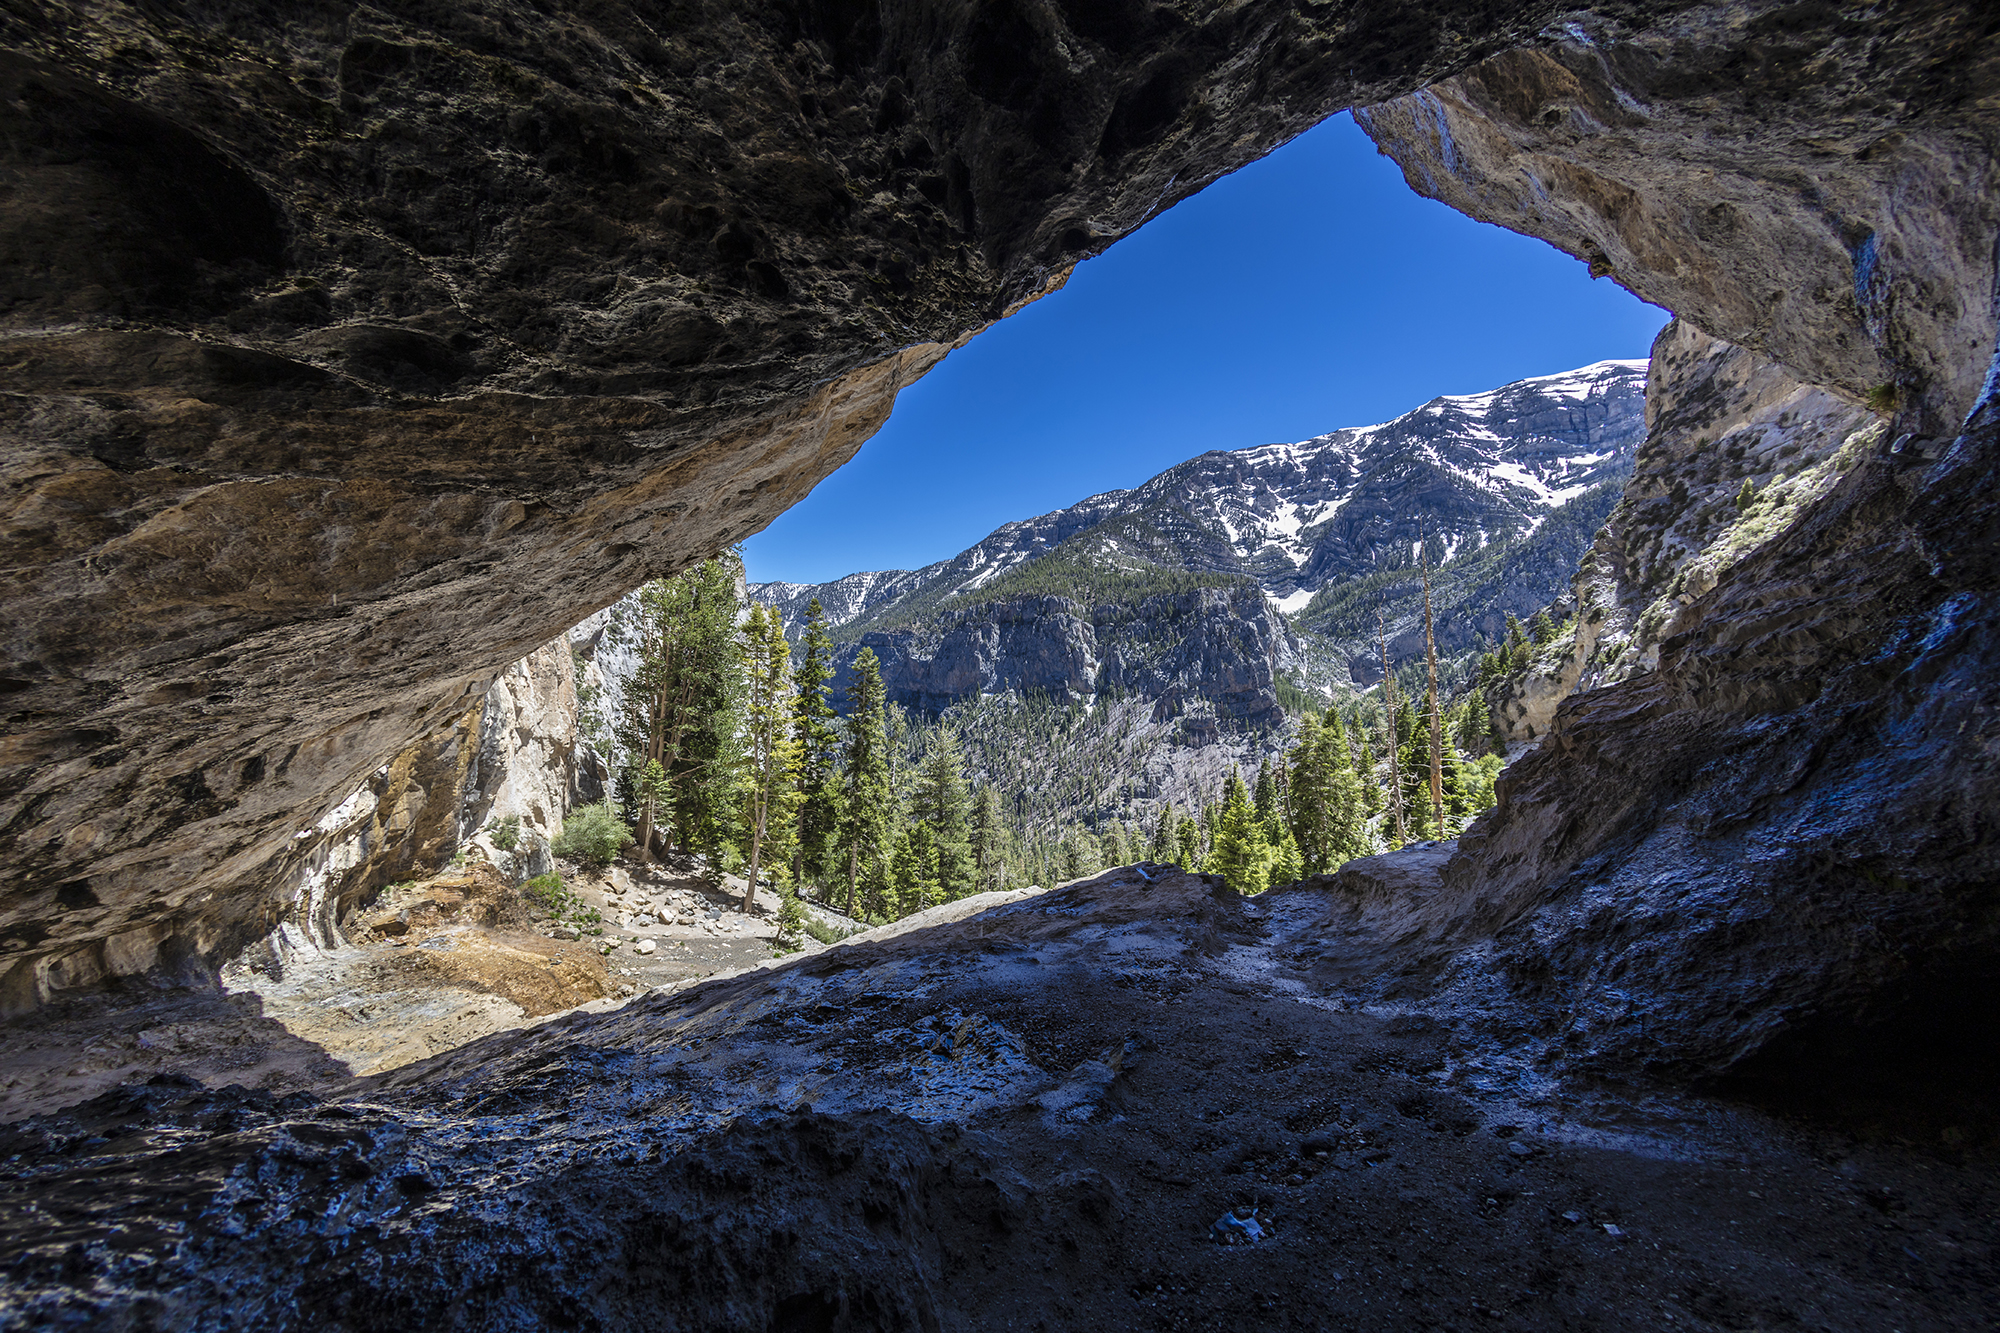 Photo of a view of Mt. Charleston, a snow-capped mountain, through a rocky cave.